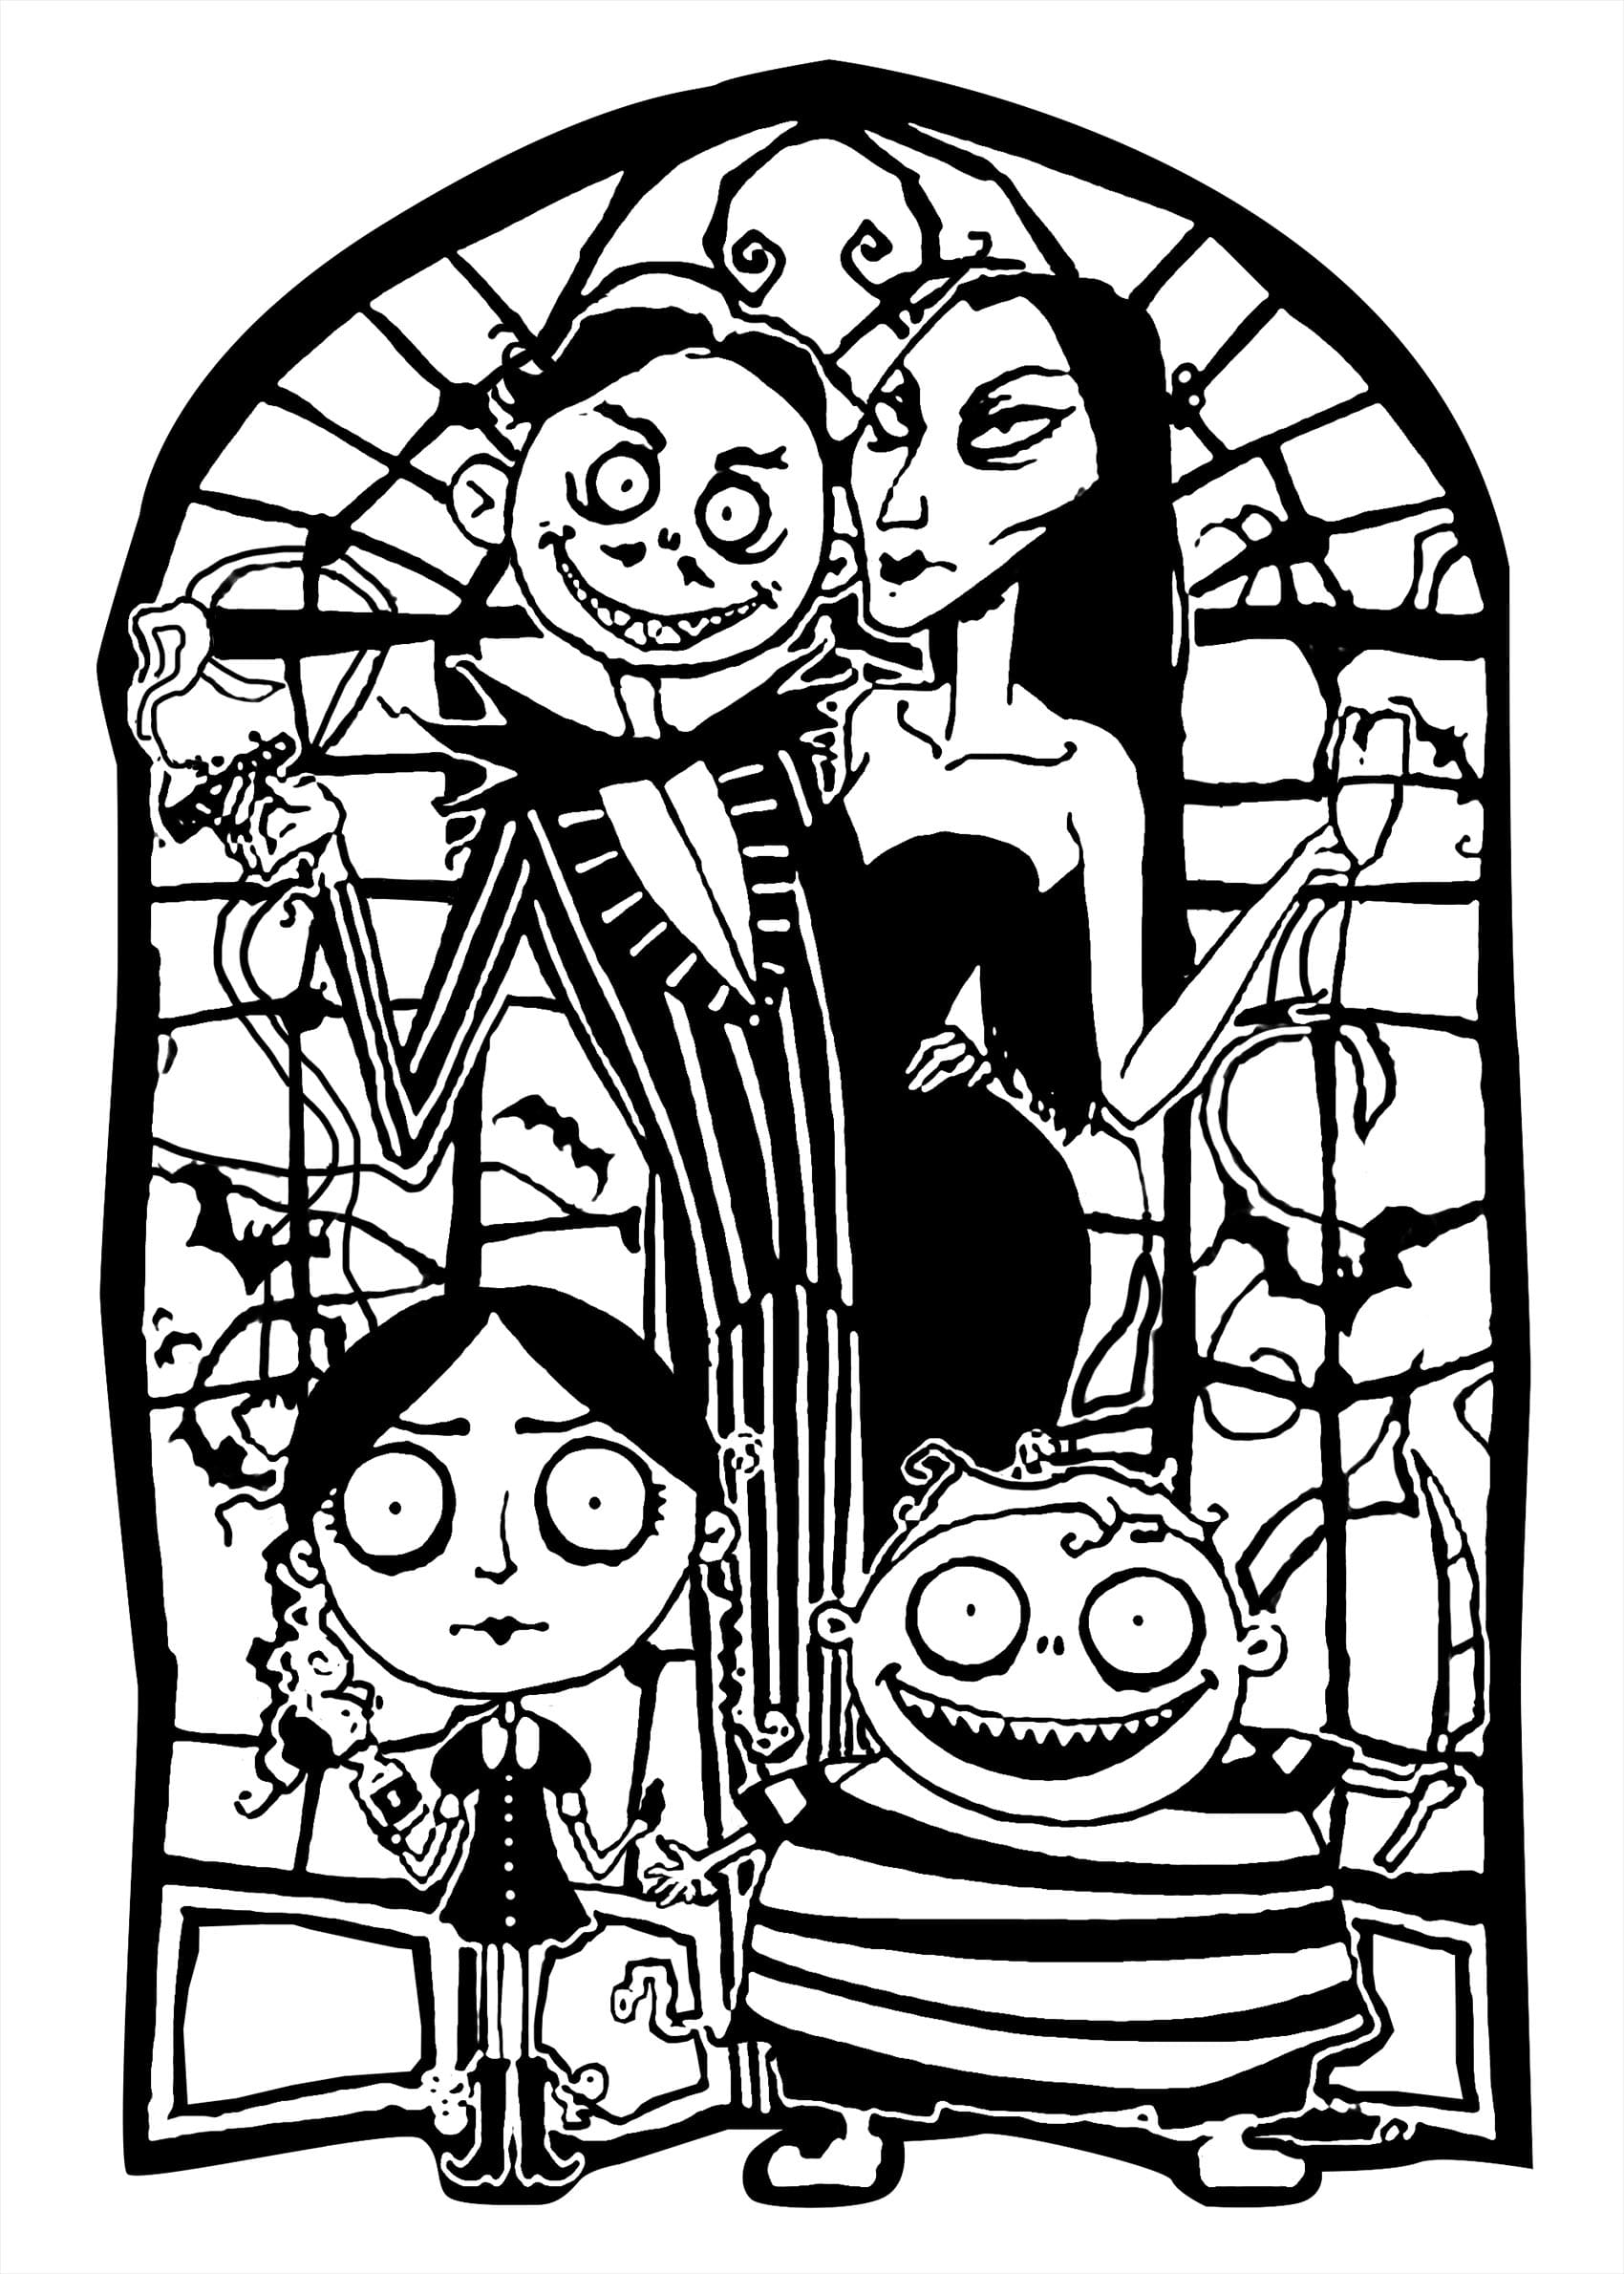 Adams Family For Children Coloring Page